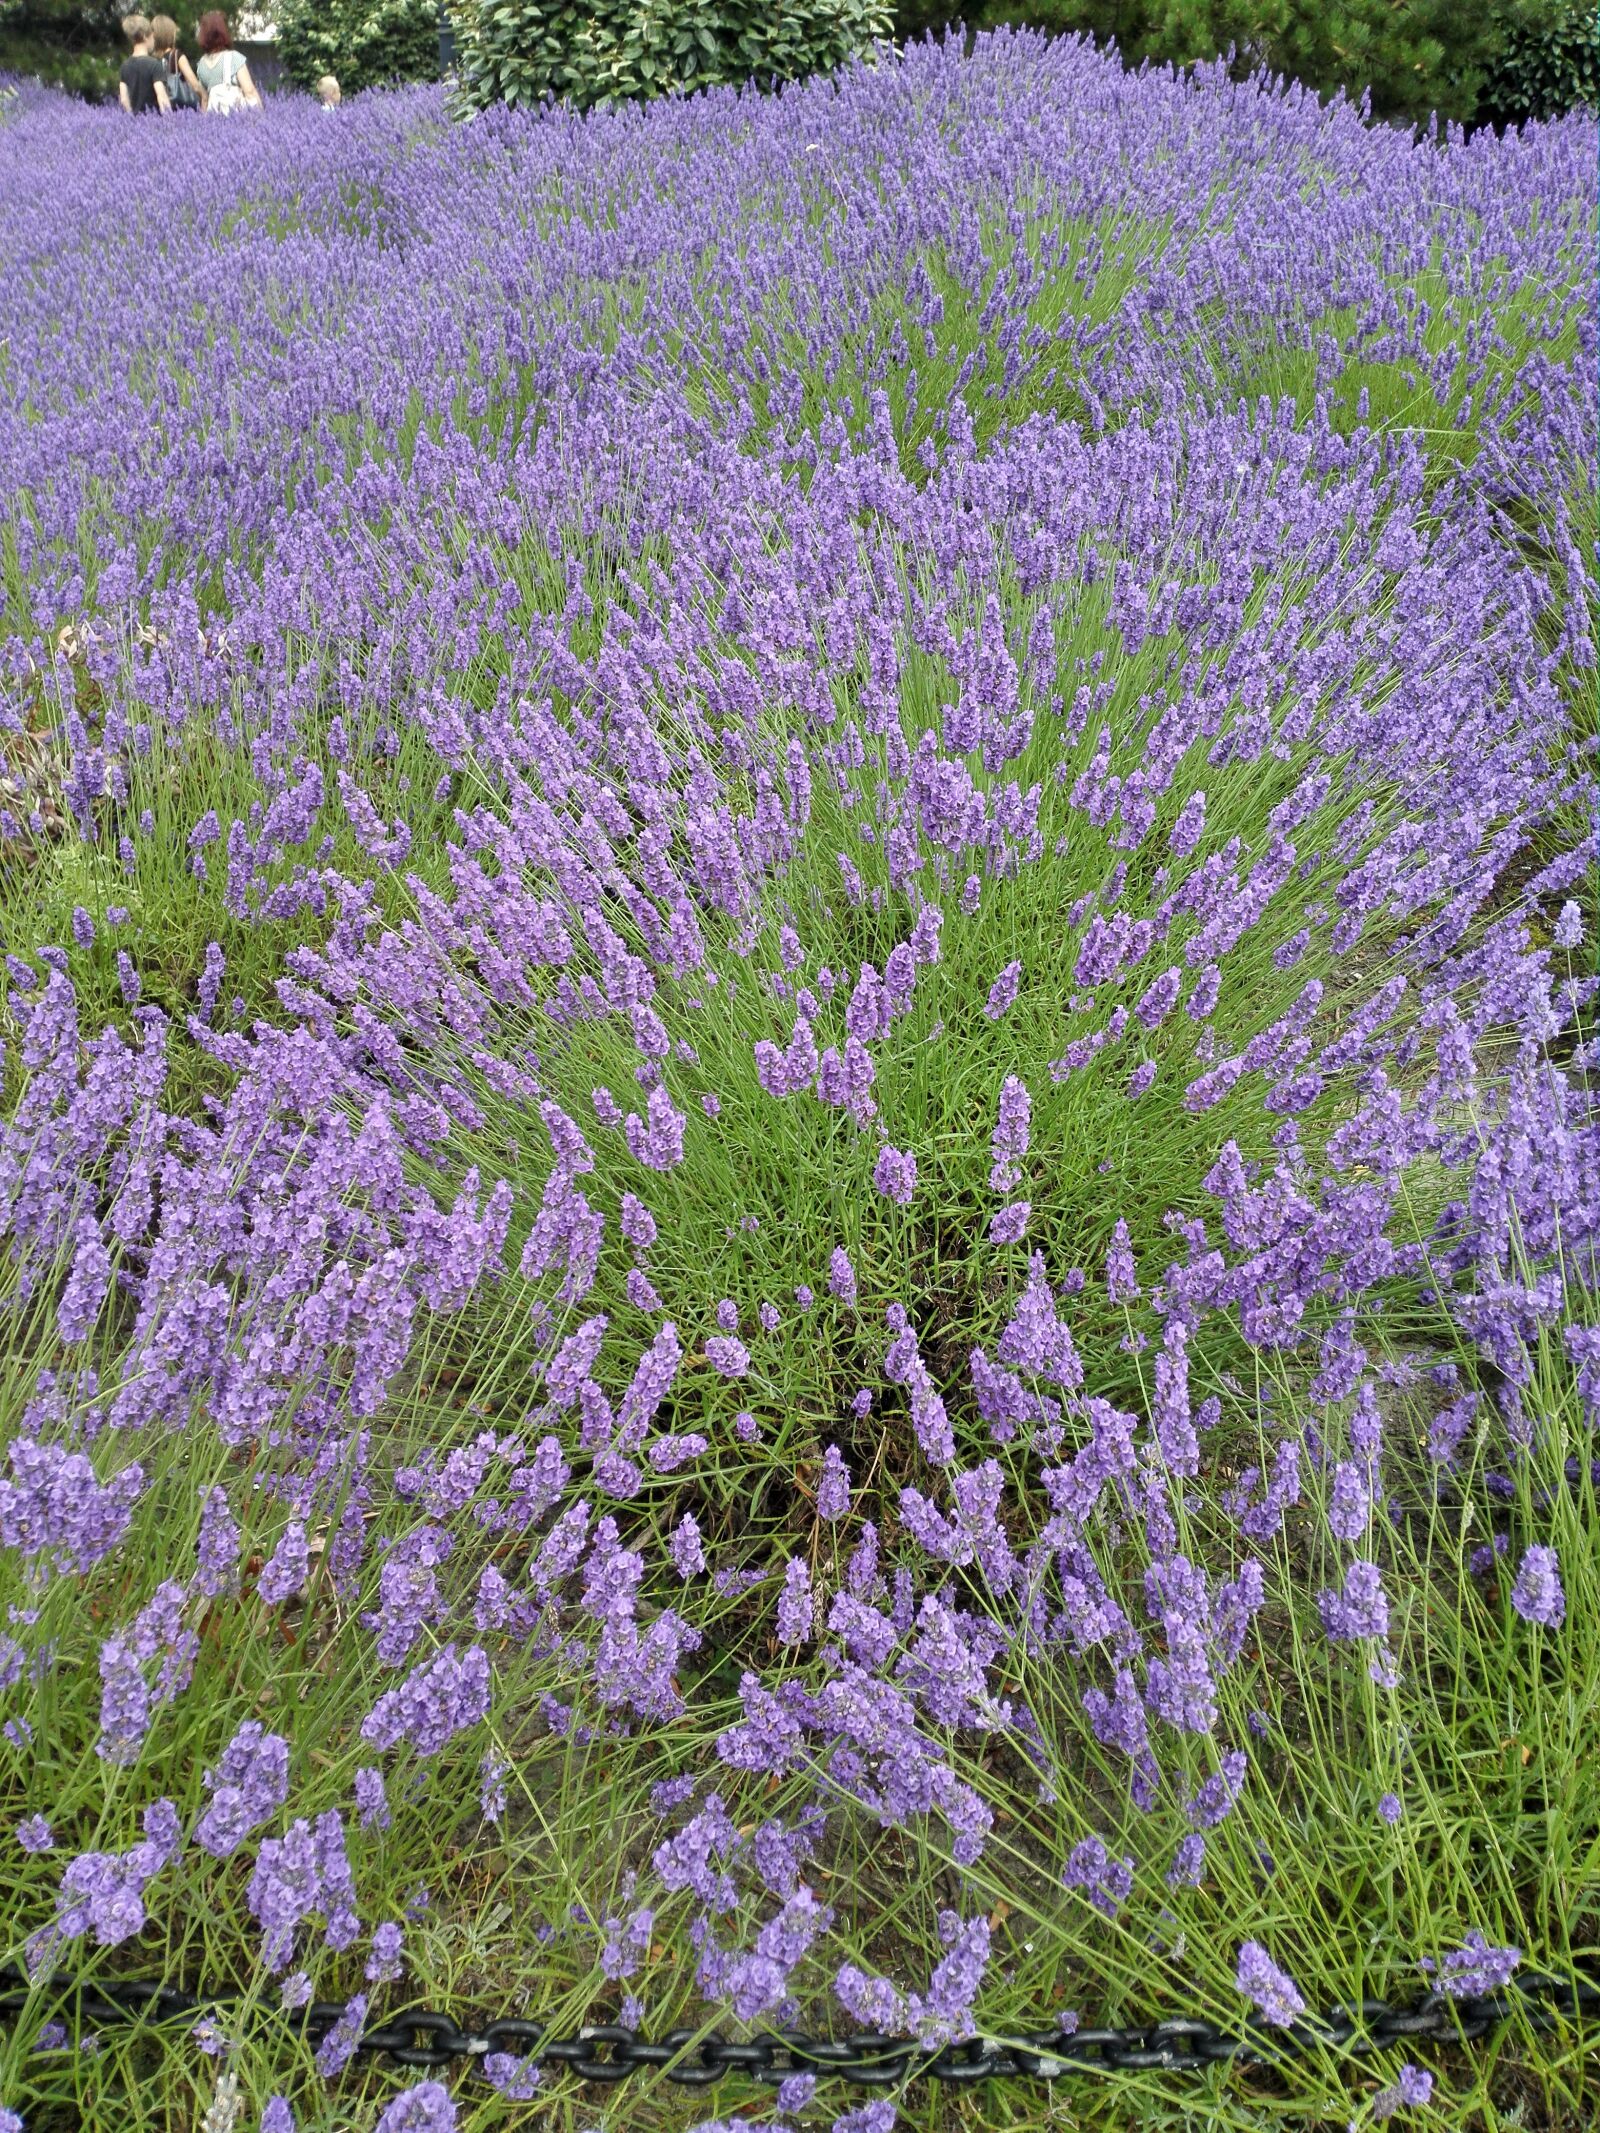 HUAWEI Mate 7 sample photo. Lavender, summer, vacations photography